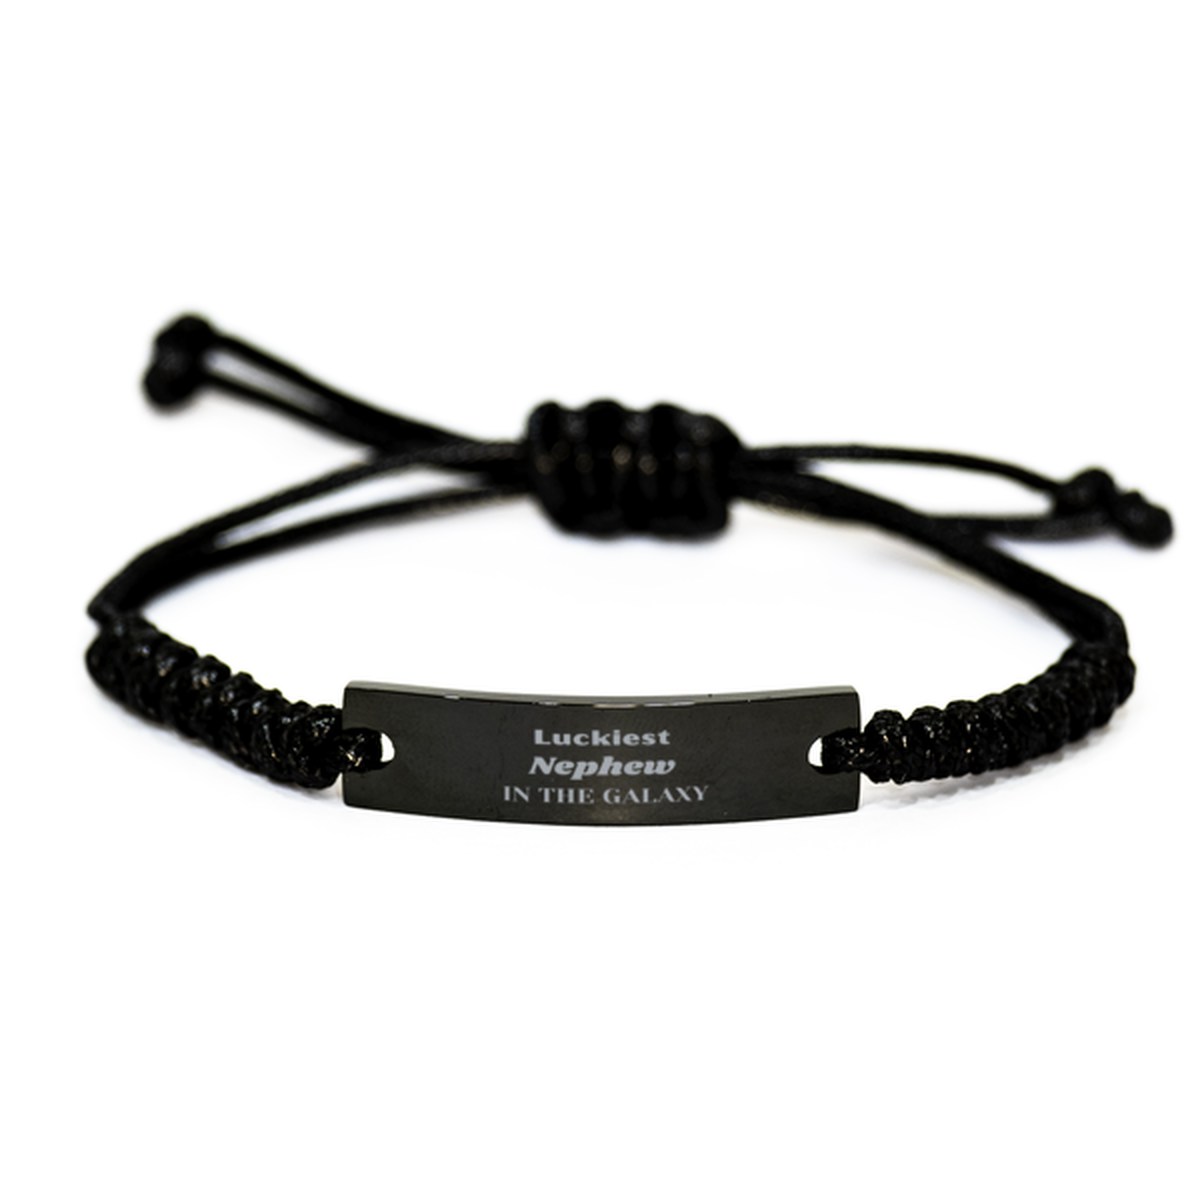 Luckiest Nephew in the Galaxy, To My Nephew Engraved Gifts, Christmas Nephew Black Rope Bracelet Gifts, X-mas Birthday Unique Gifts For Nephew Men Women